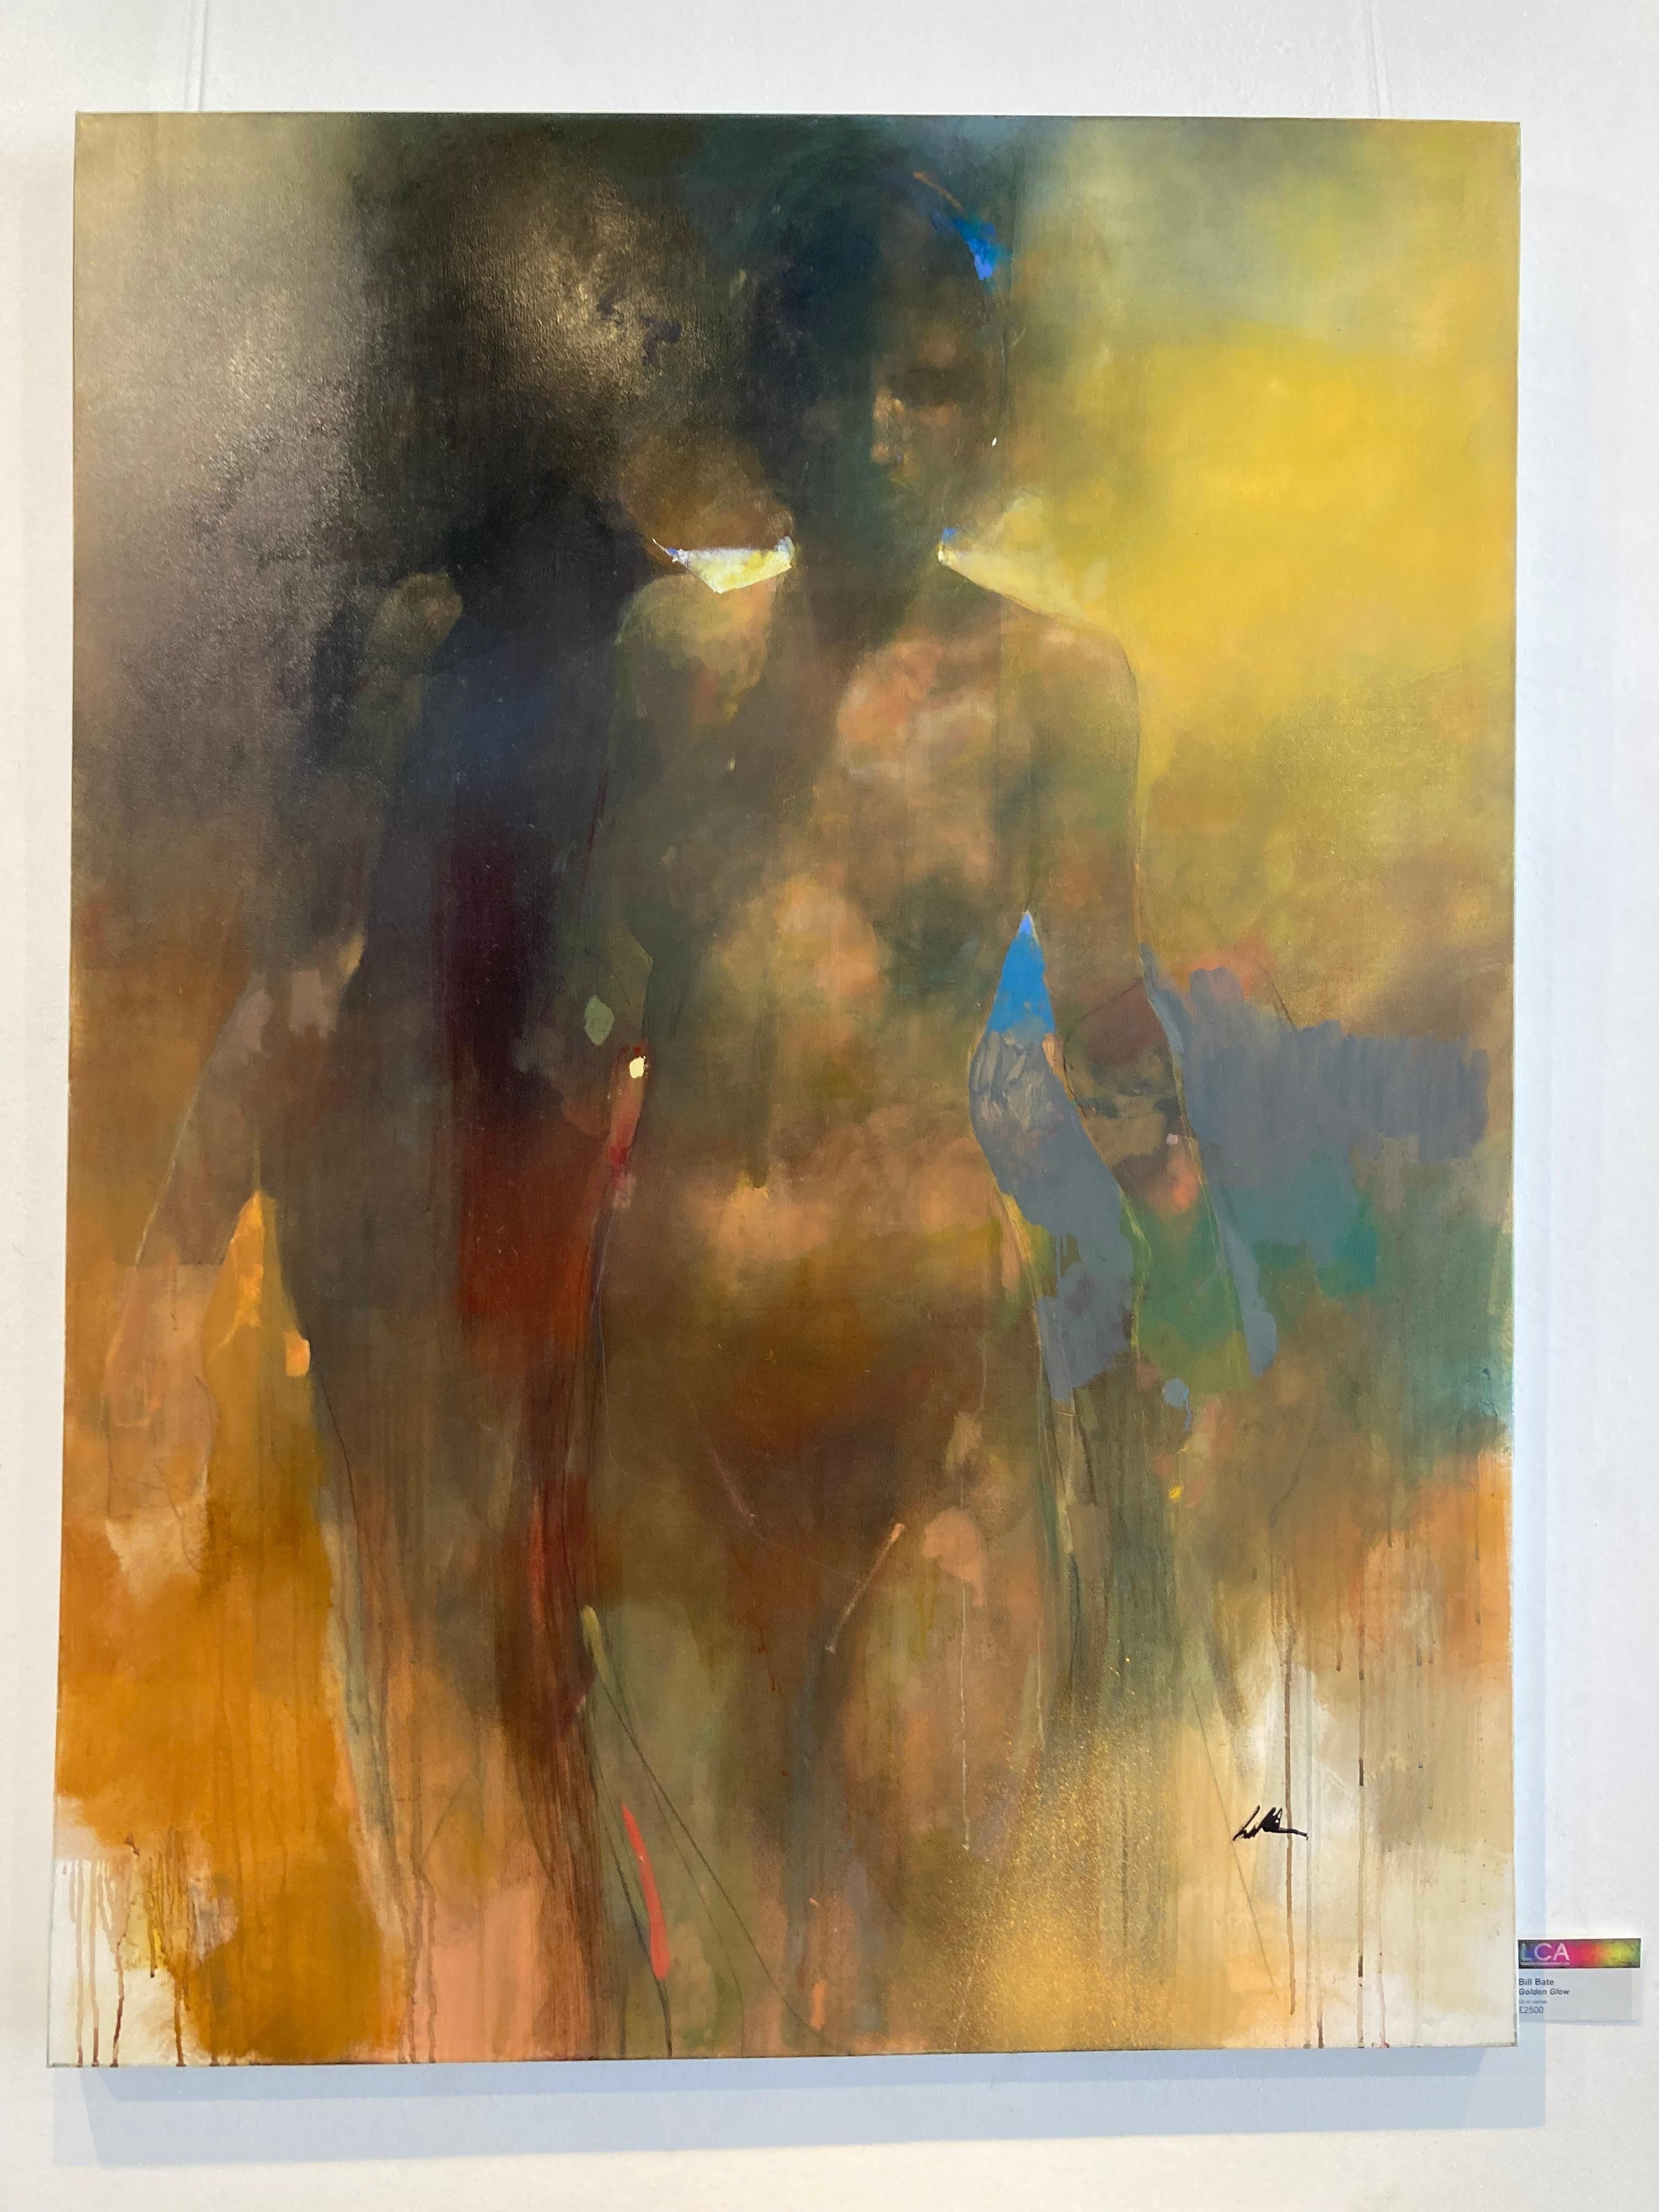 Golden Glow - contemporary figurative underwater nude bodies dreamy oil painting - Painting by Bill Bate